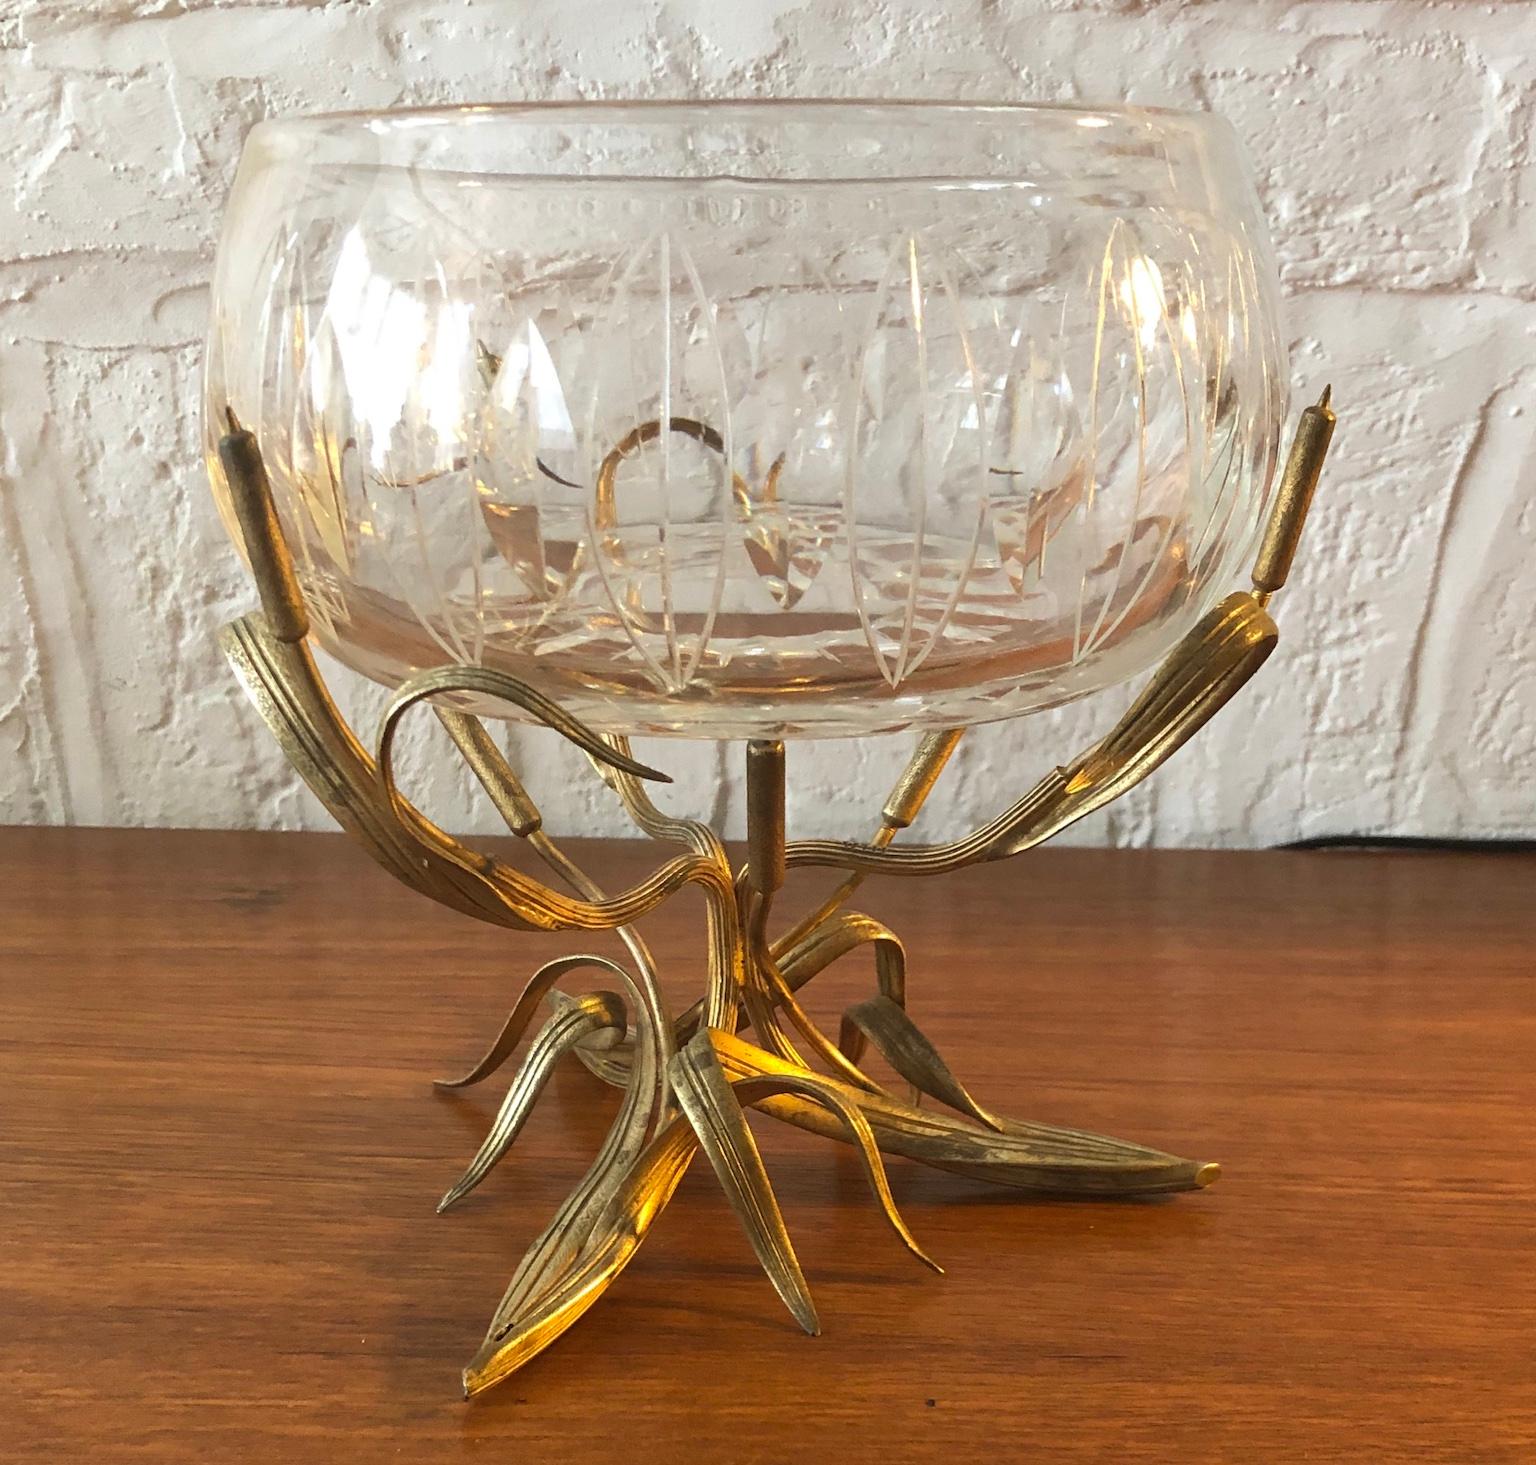 Thomas Webb & Sons, cut glass centrepiece bowl on gilt bronze stand, England, 1950s

Exquisite Thomas Webb & Son cut glass centrepiece bowl on gilt bronze stand. 
Heavy cut glass bowl with leaf shape decoration, and soft thick cut rim, the gilt